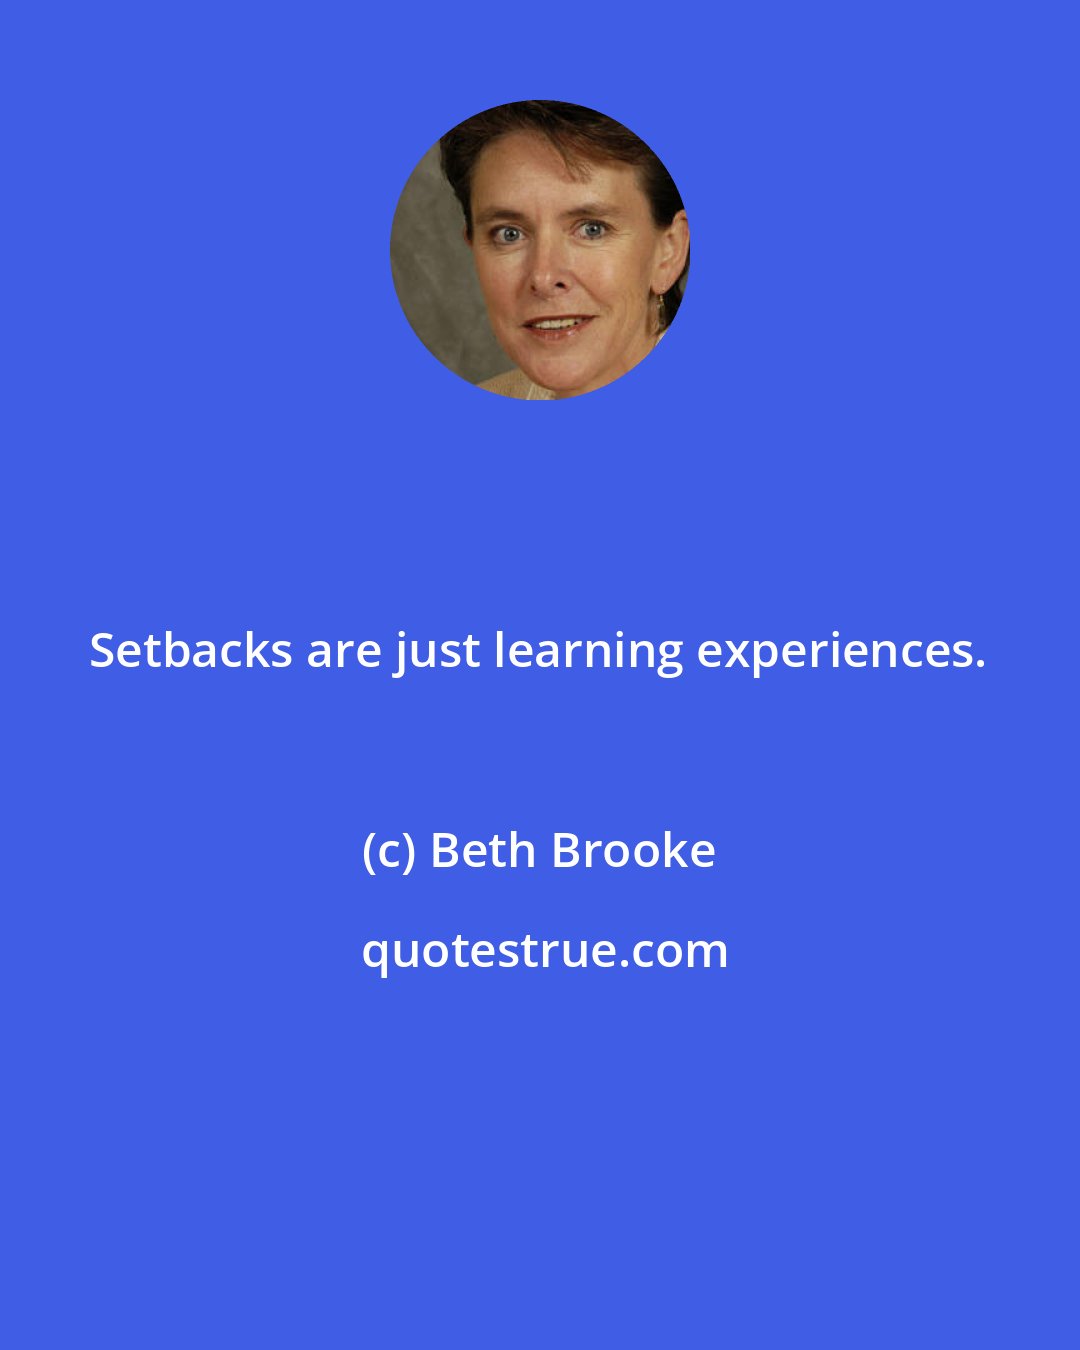 Beth Brooke: Setbacks are just learning experiences.